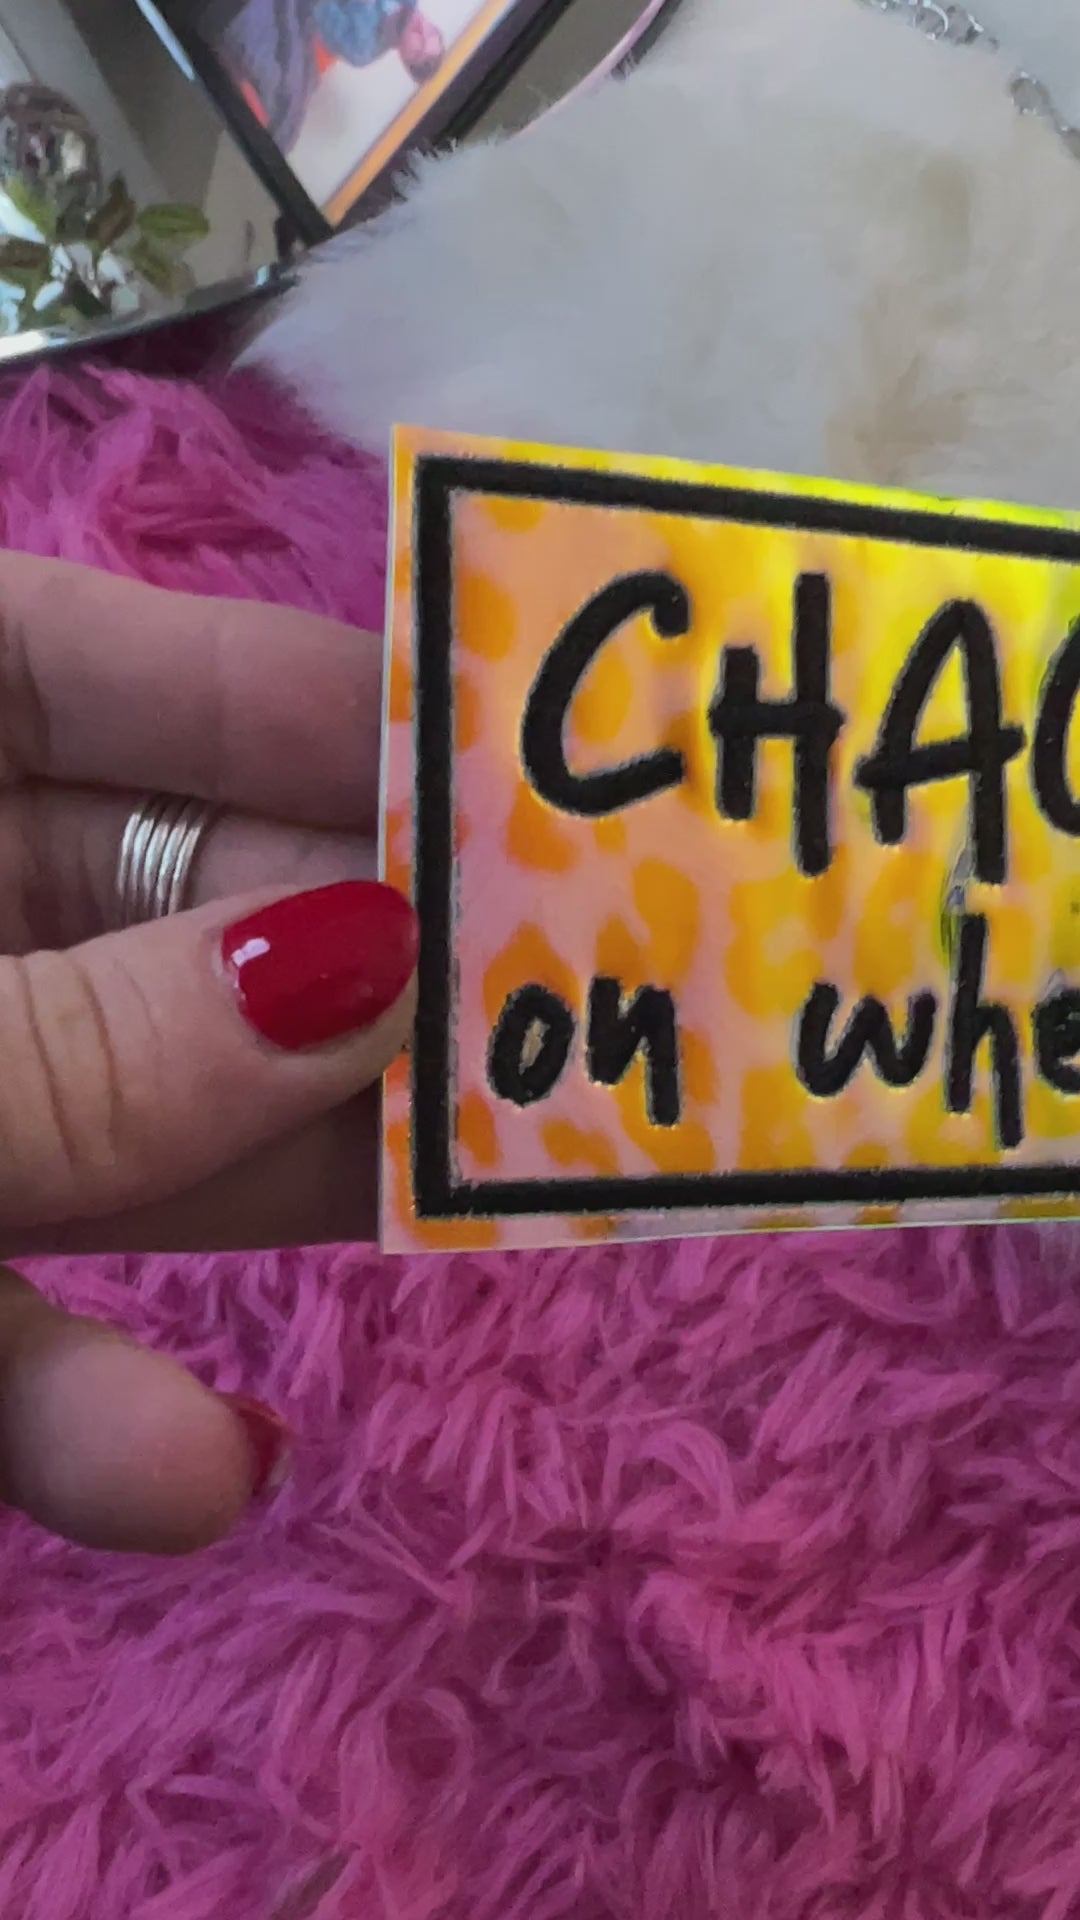 Chaos on wheels leopard print Holographic Patch